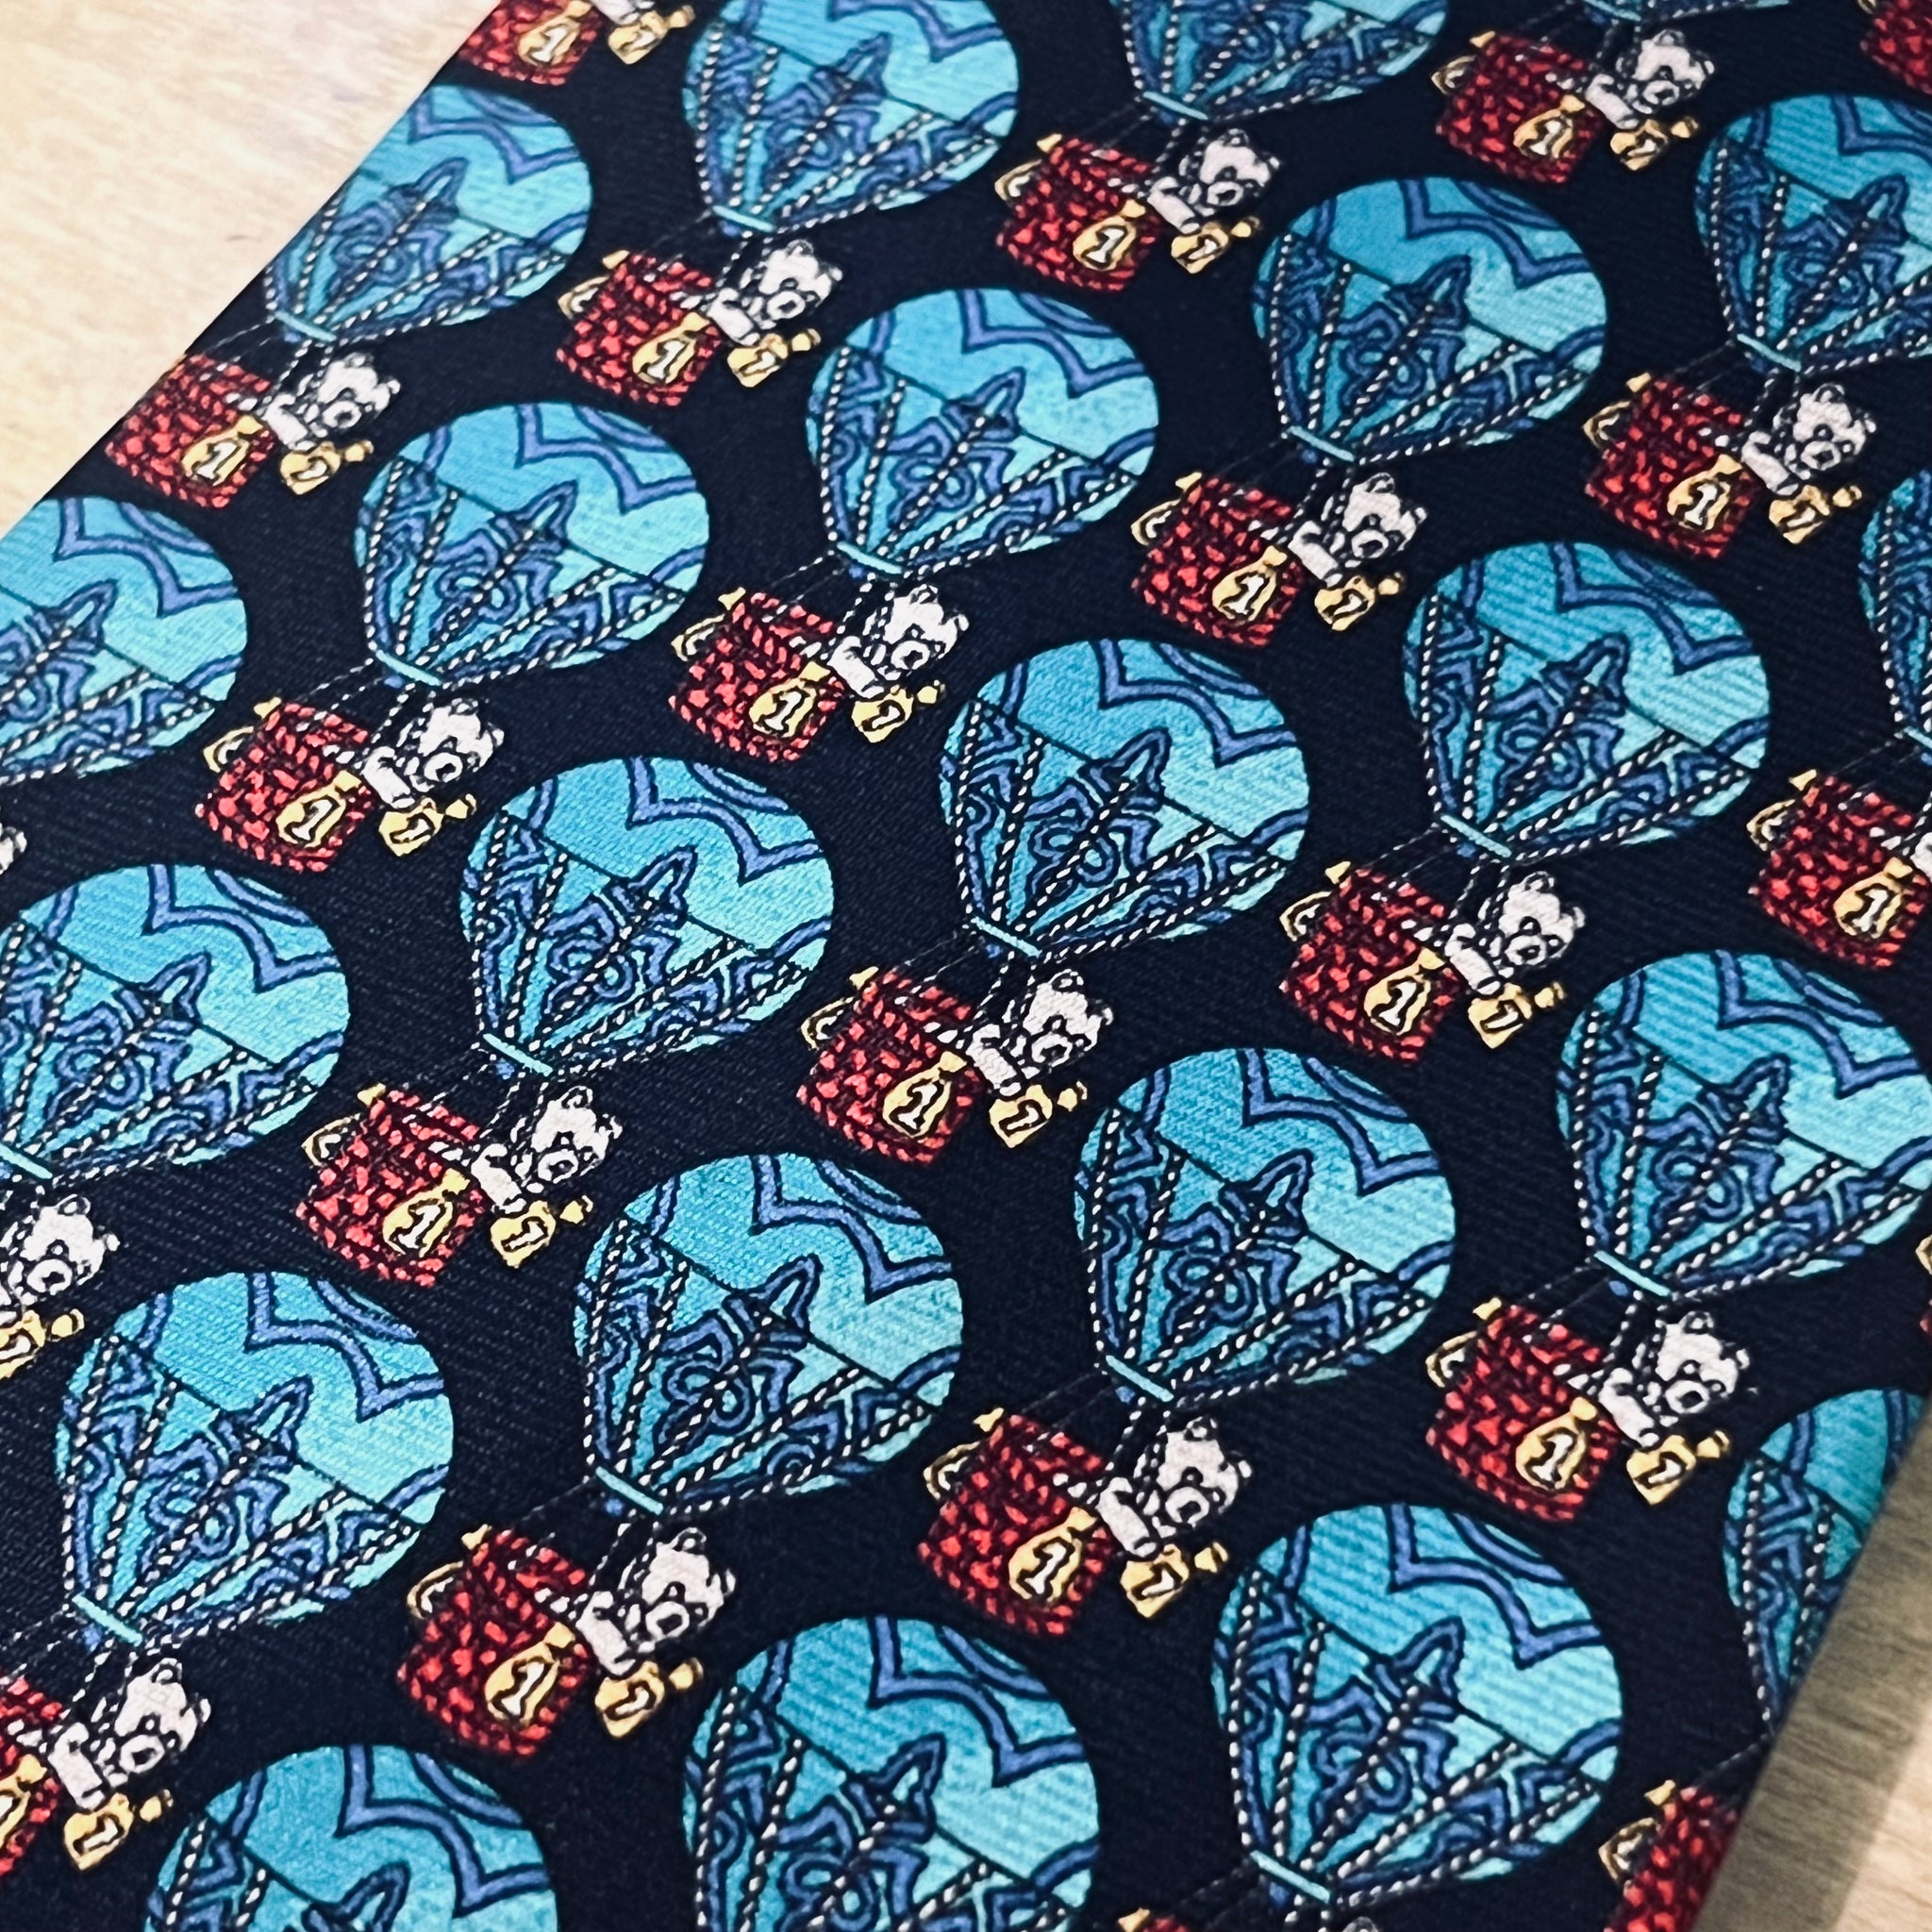 Tie - Black with Teal Air Balloons